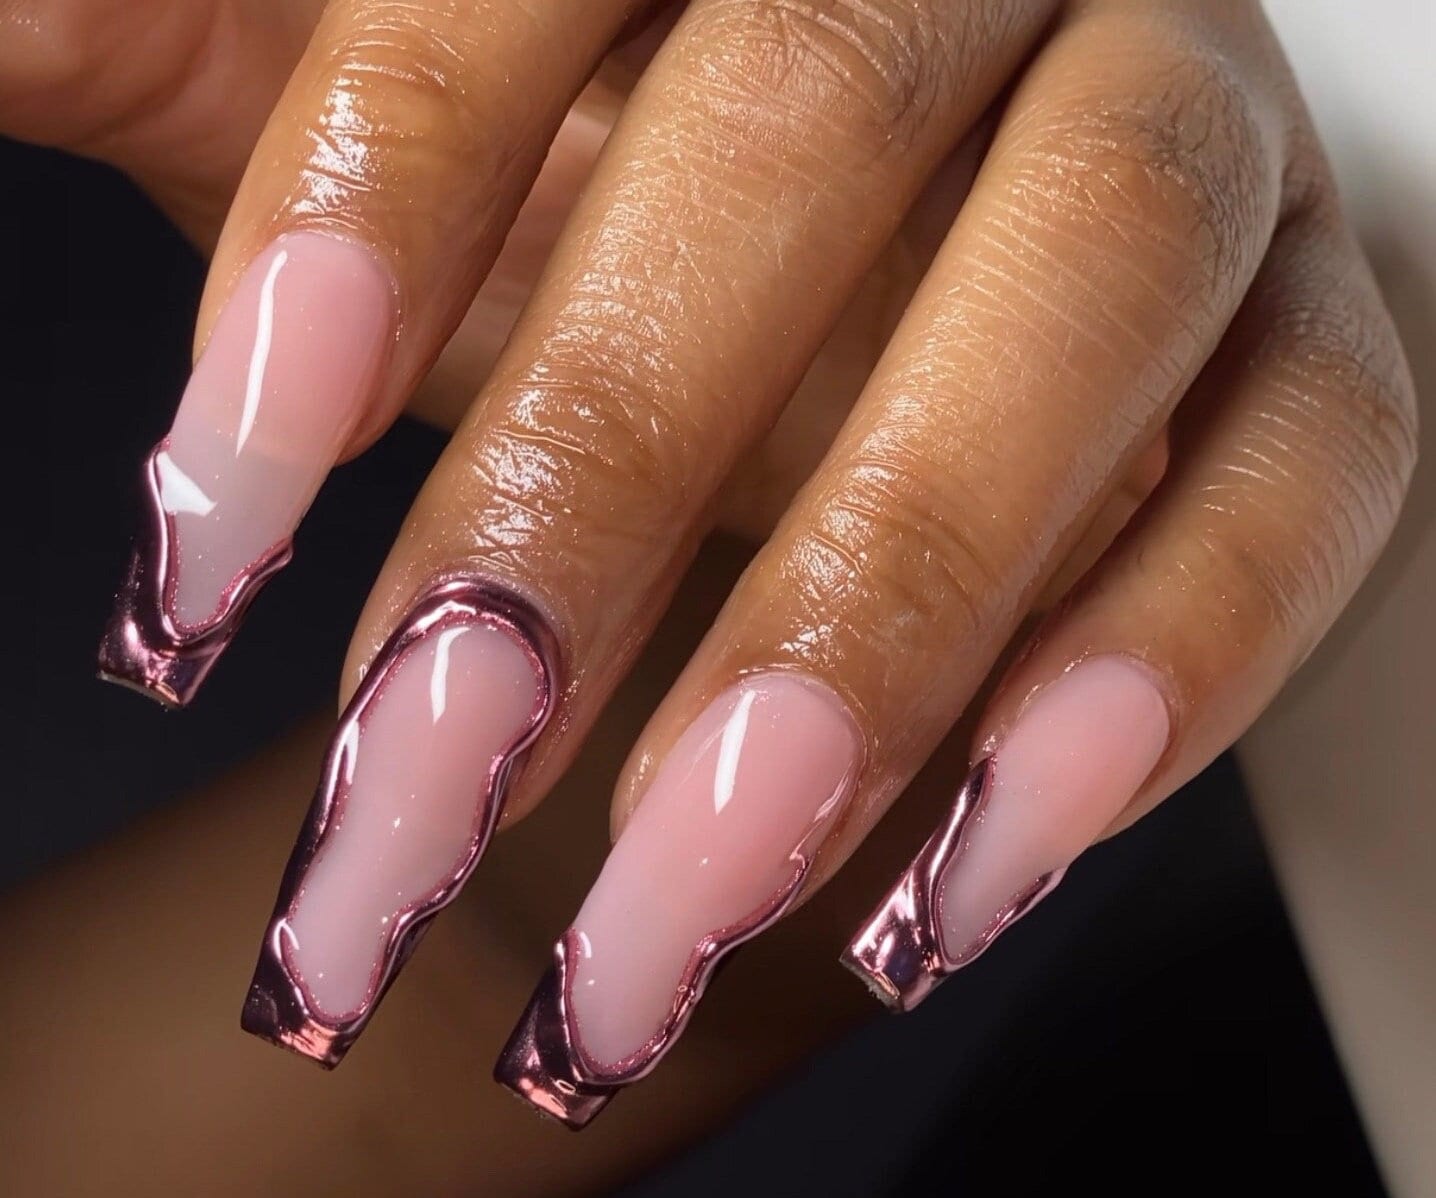 How to apply chrome to gel polish | Rose Gold CHROME nails 💅 - YouTube